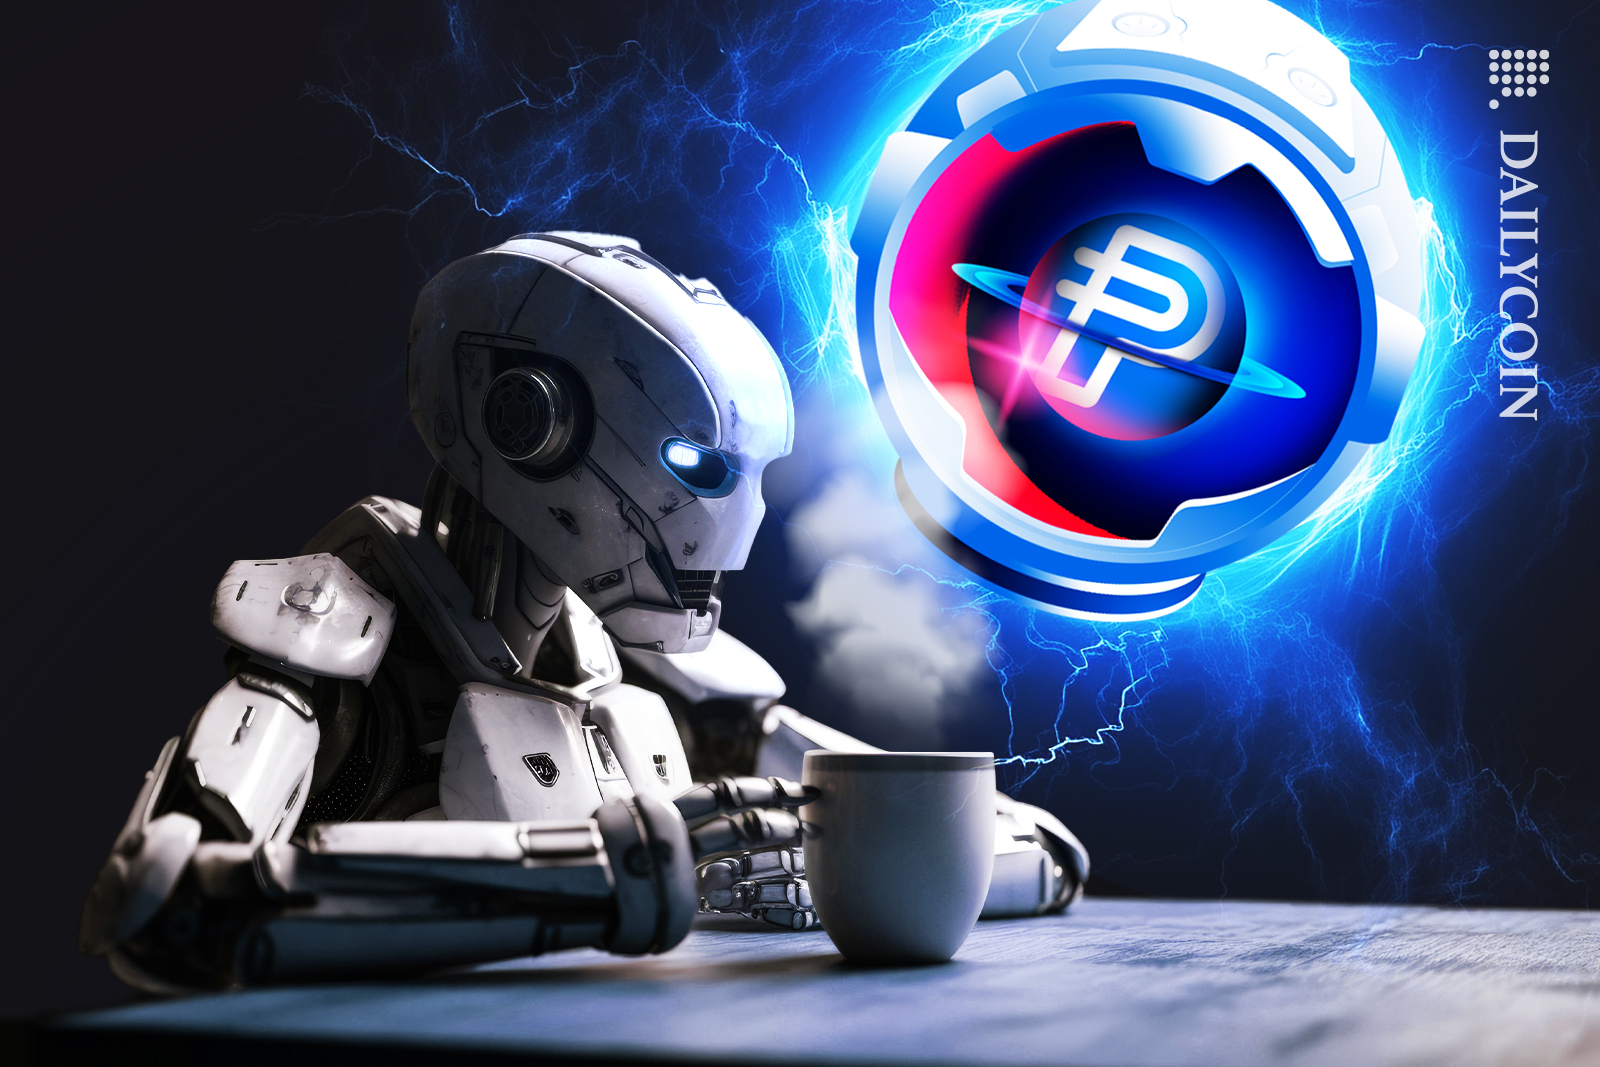 Robot having his morning coffee, worrying about PayPal's stablecoin.